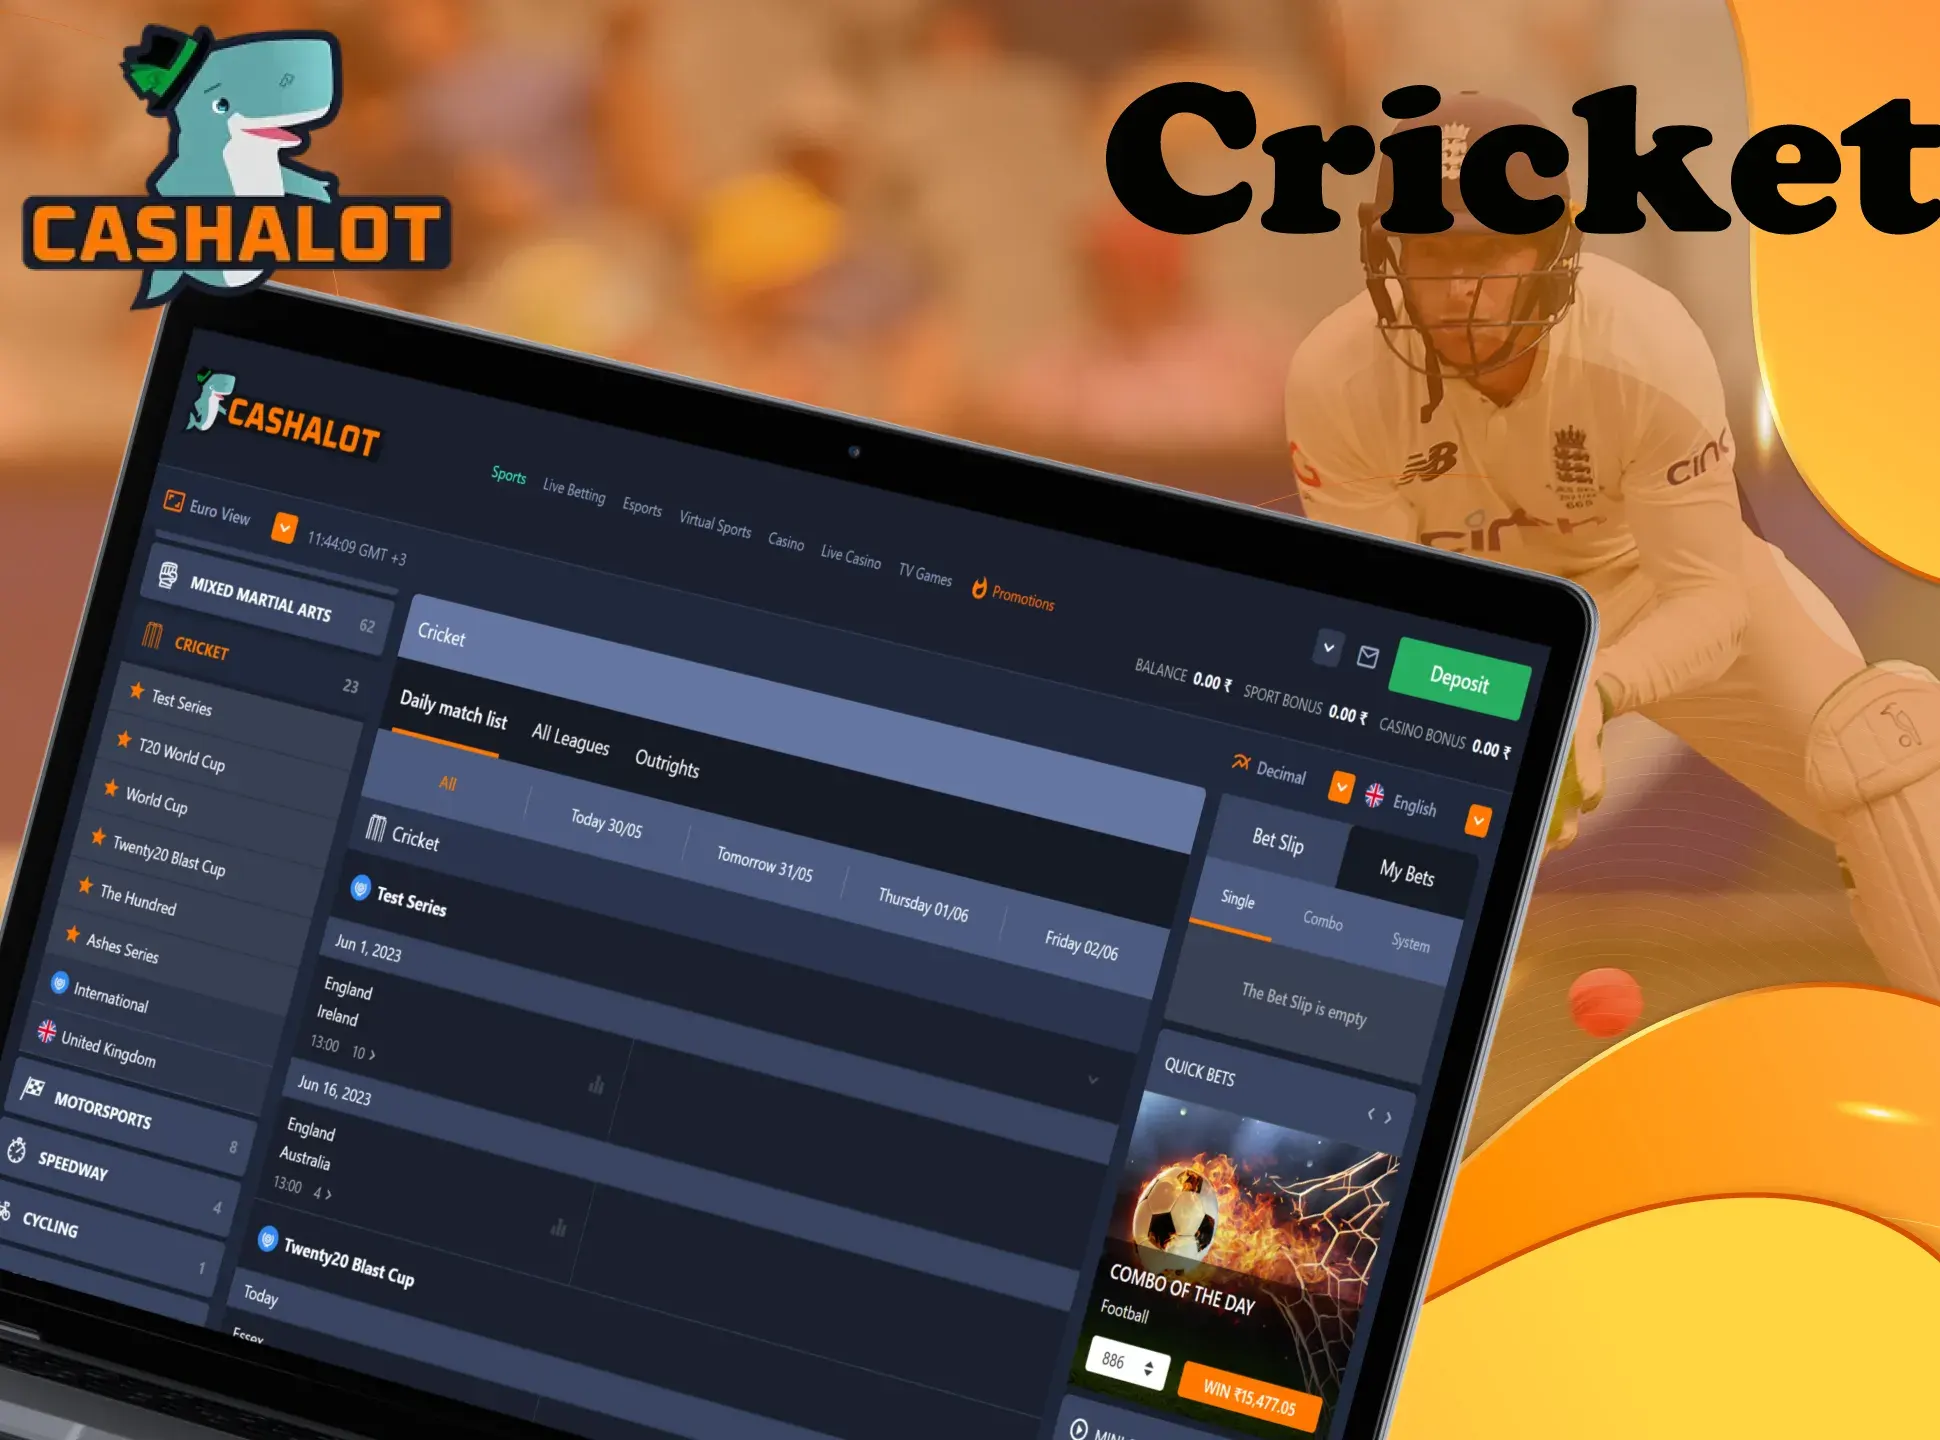 Bet on the most famous cricket teams in India at Cashalot.